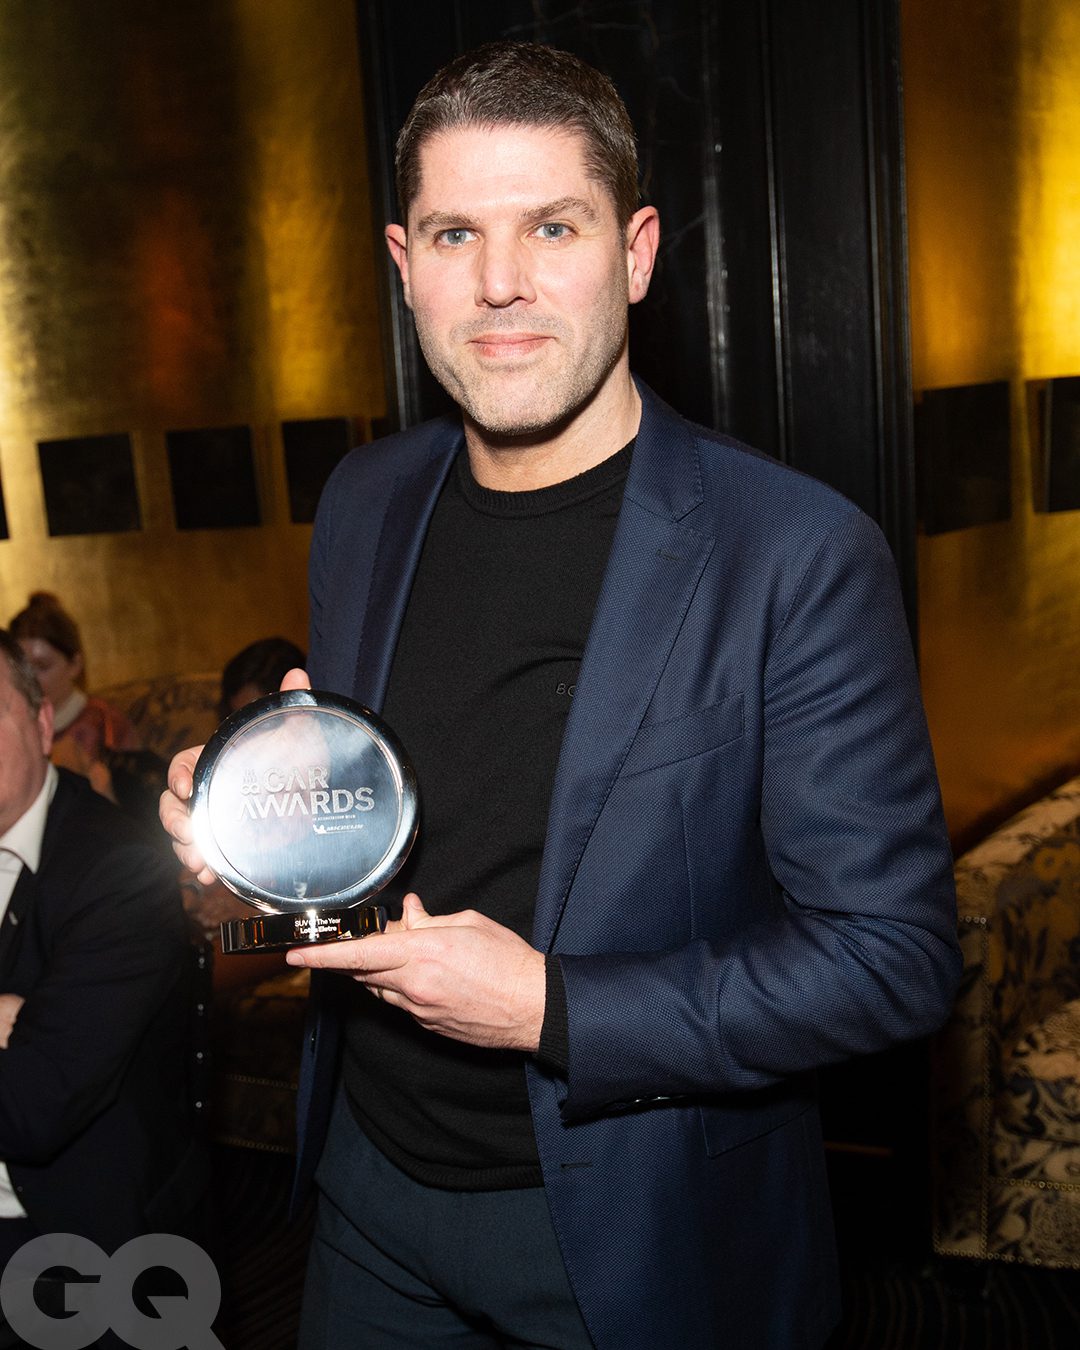 Matthew Hill, Head of Interior Design at Lotus collecting GQ's 'SUV of the Year' award for the Lotus Eletre